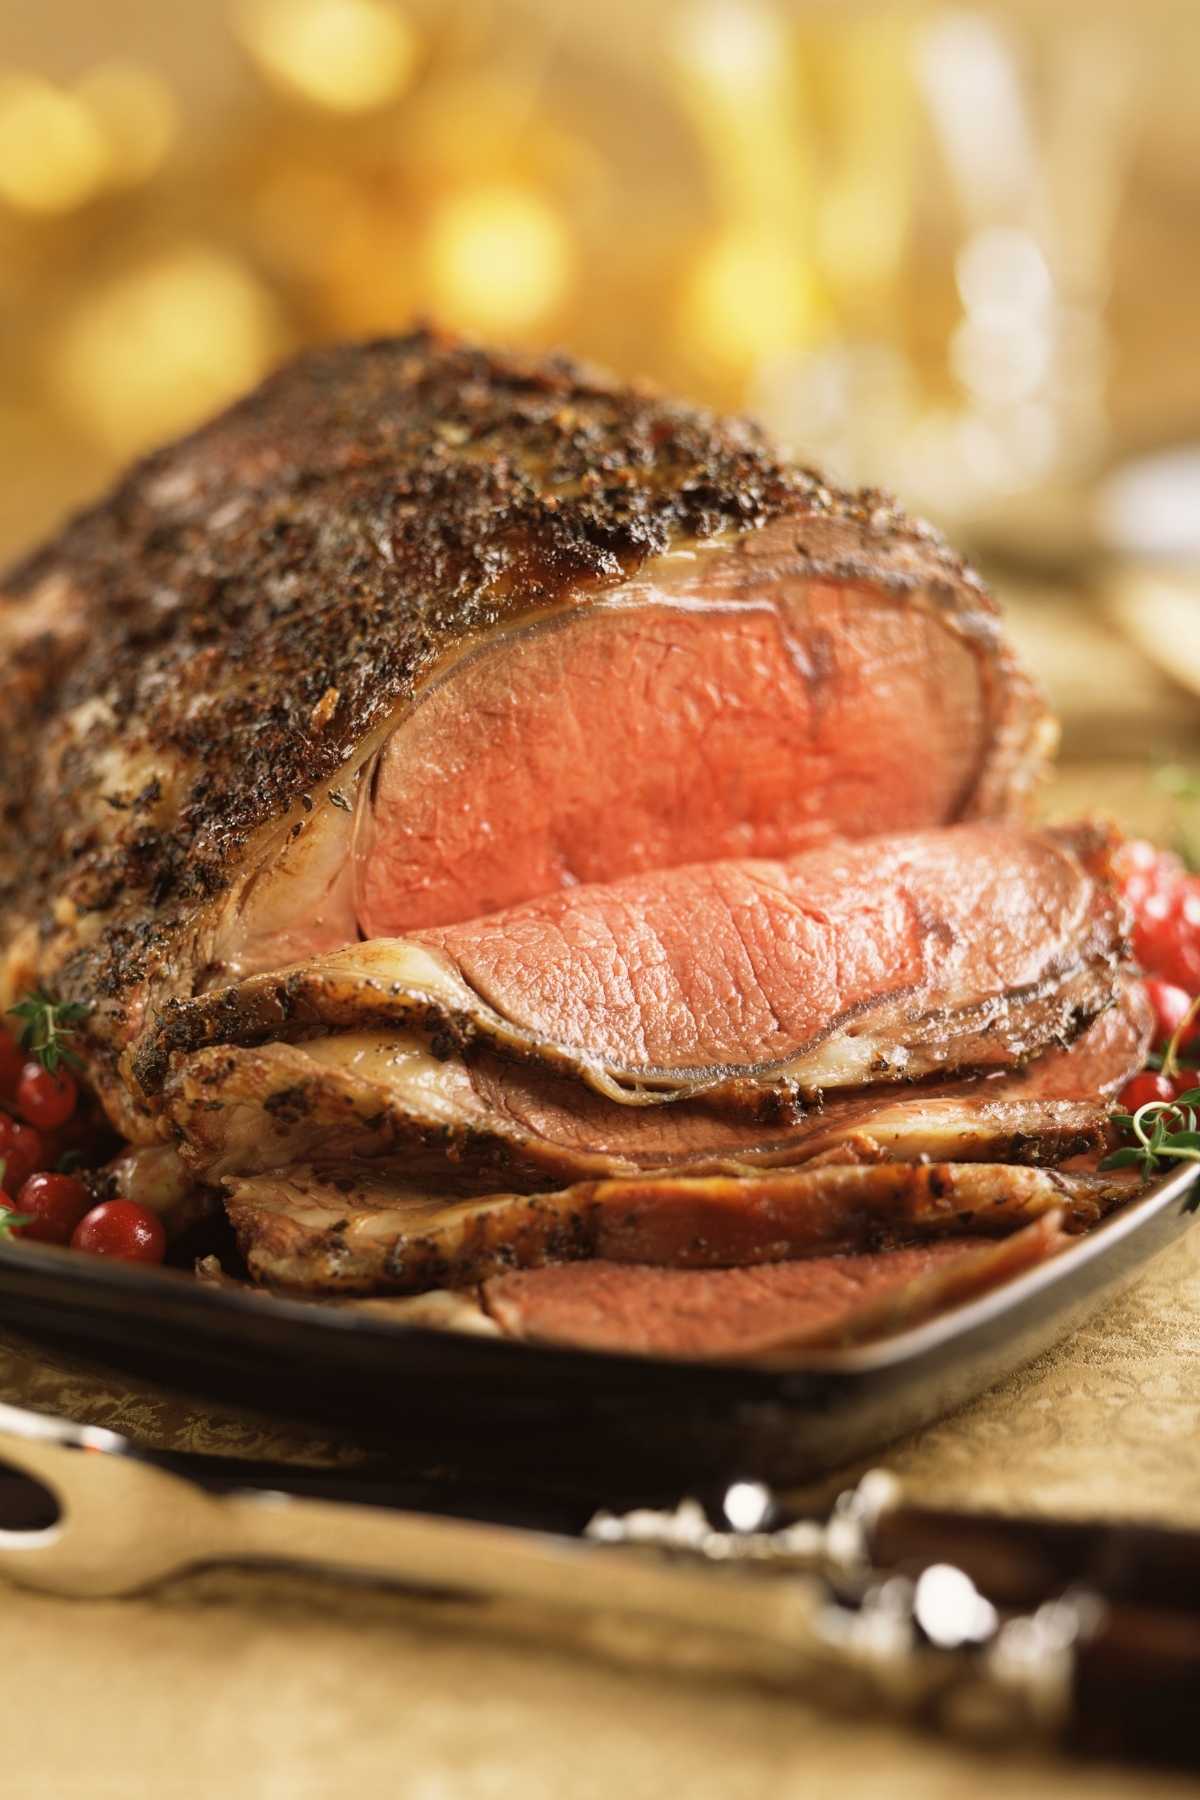 Always a treat over the holiday season and at special occasion celebrations, prime rib is a delicious cut of beef. It’s also an investment that you don’t want to waste. That’s why we’re sharing 10 of the Best Leftover Prime Rib Recipes. So, if you’re looking for some inspiration, we think you’ll find a few that you and your family will love!